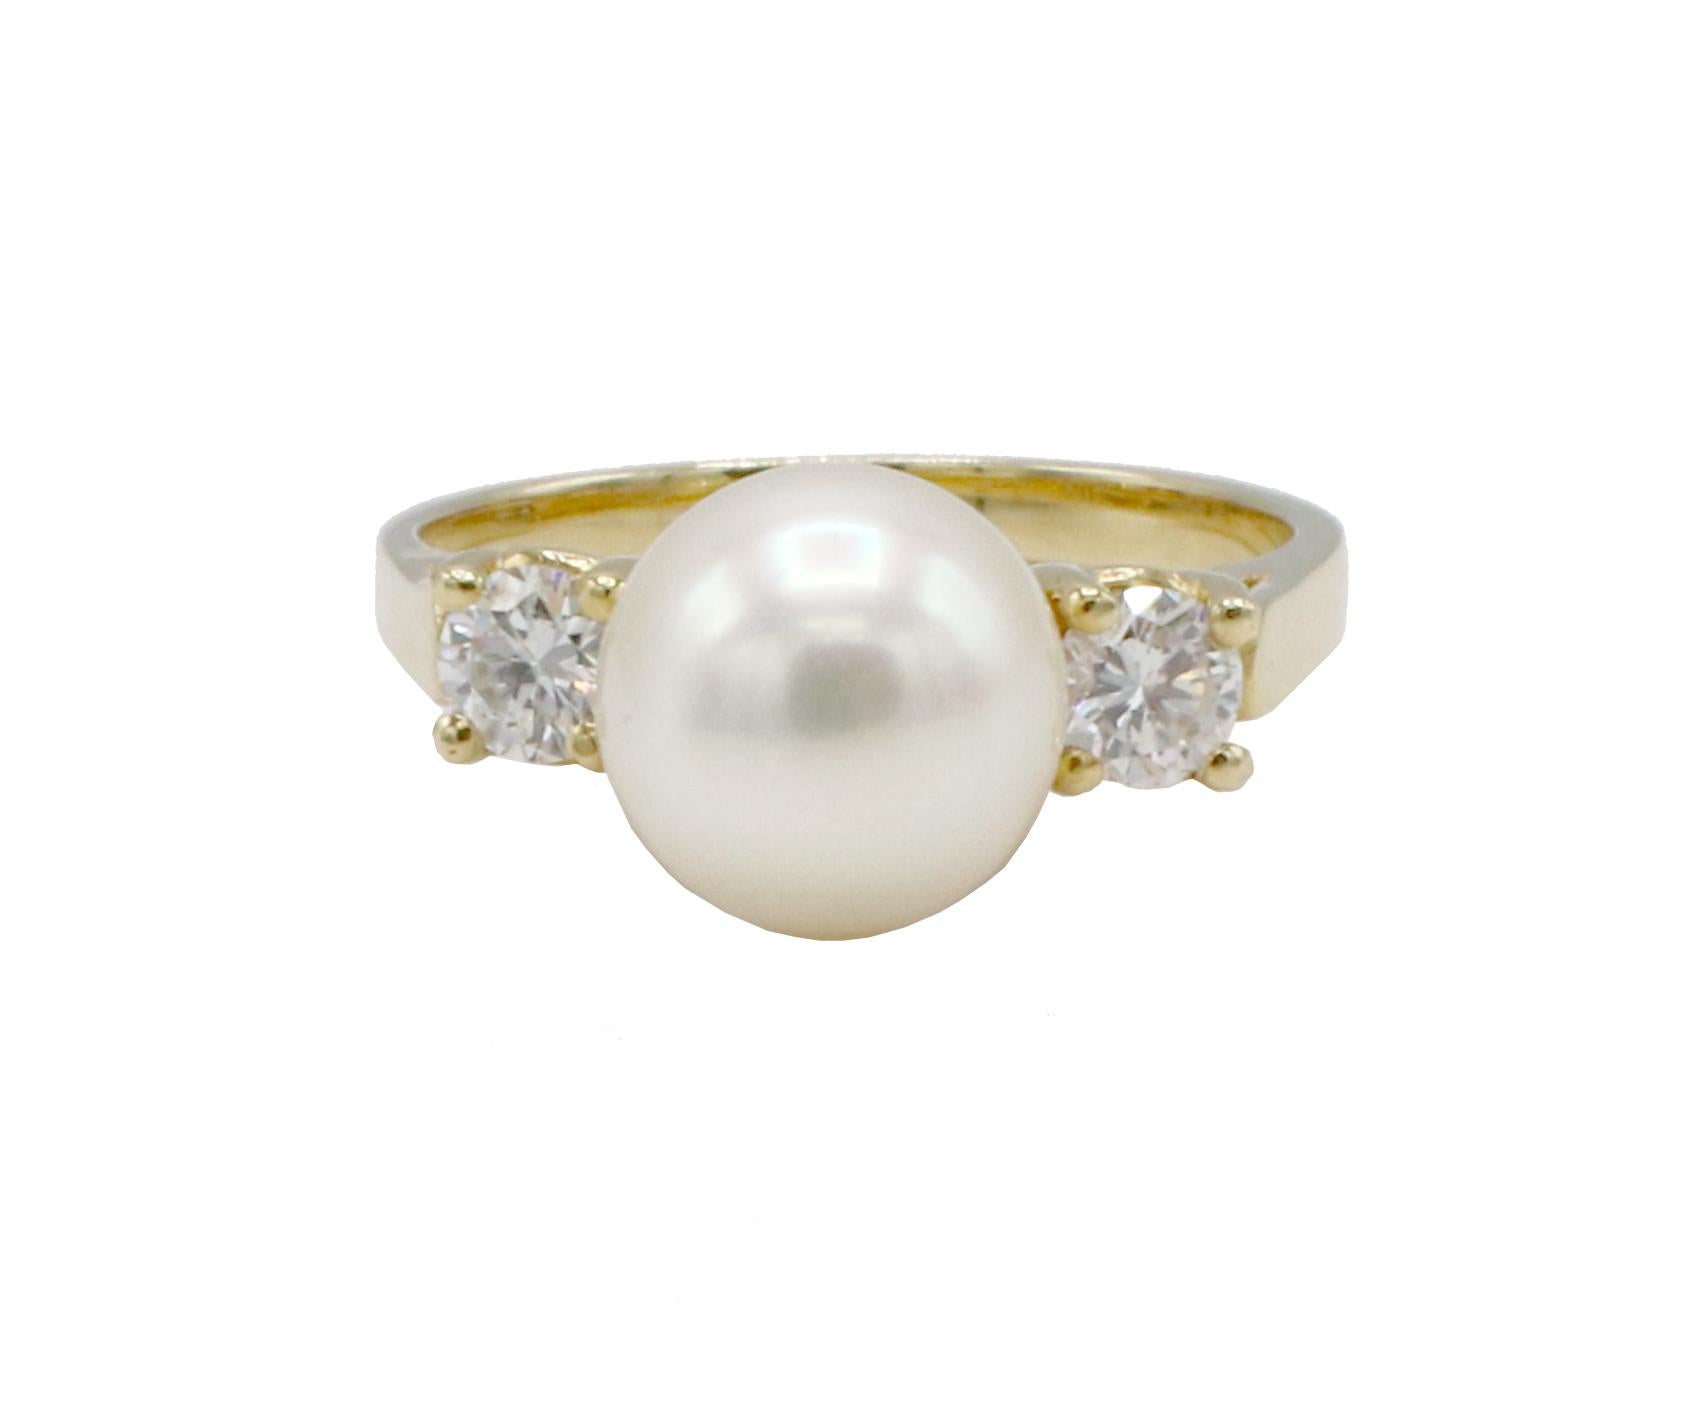 14 Karat Yellow Gold Cultured Pearl & Diamond Cocktail Ring 
Metal: 14k yellow gold
Weight: 4.26 grams
Diamonds: Approx. .40 CTW G-H VS round diamonds
Size: 7.25 (US)
Height: 11mm
Band width: 2mm
